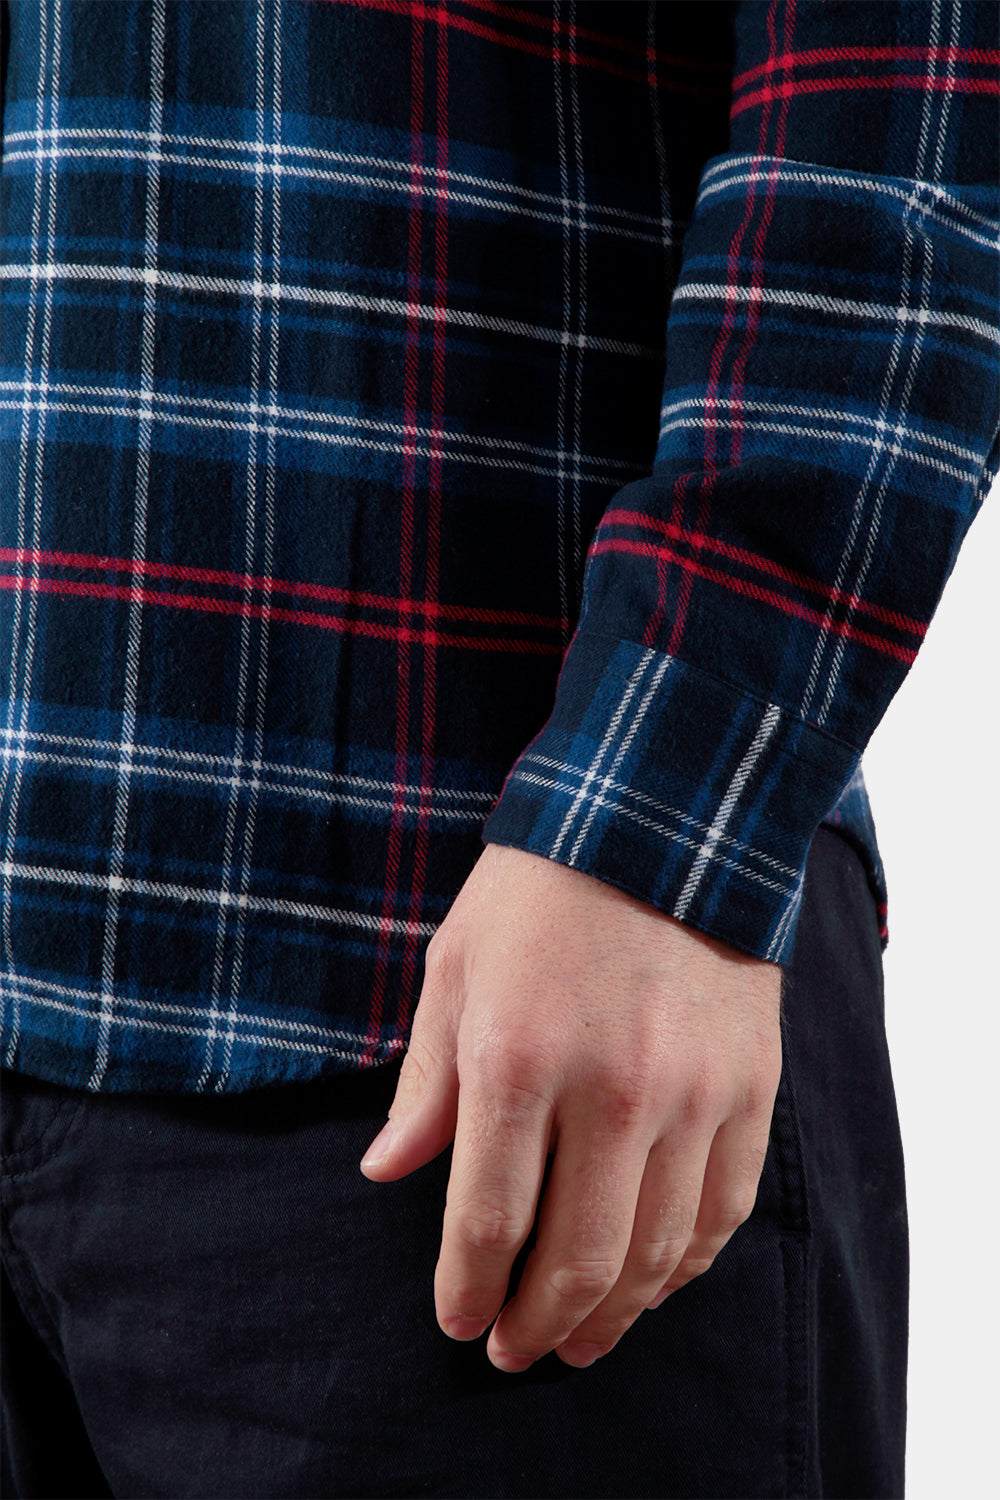 Portuguese Flannel Pop Up ESP Check Shirt (Blue / White / Red) | Number Six